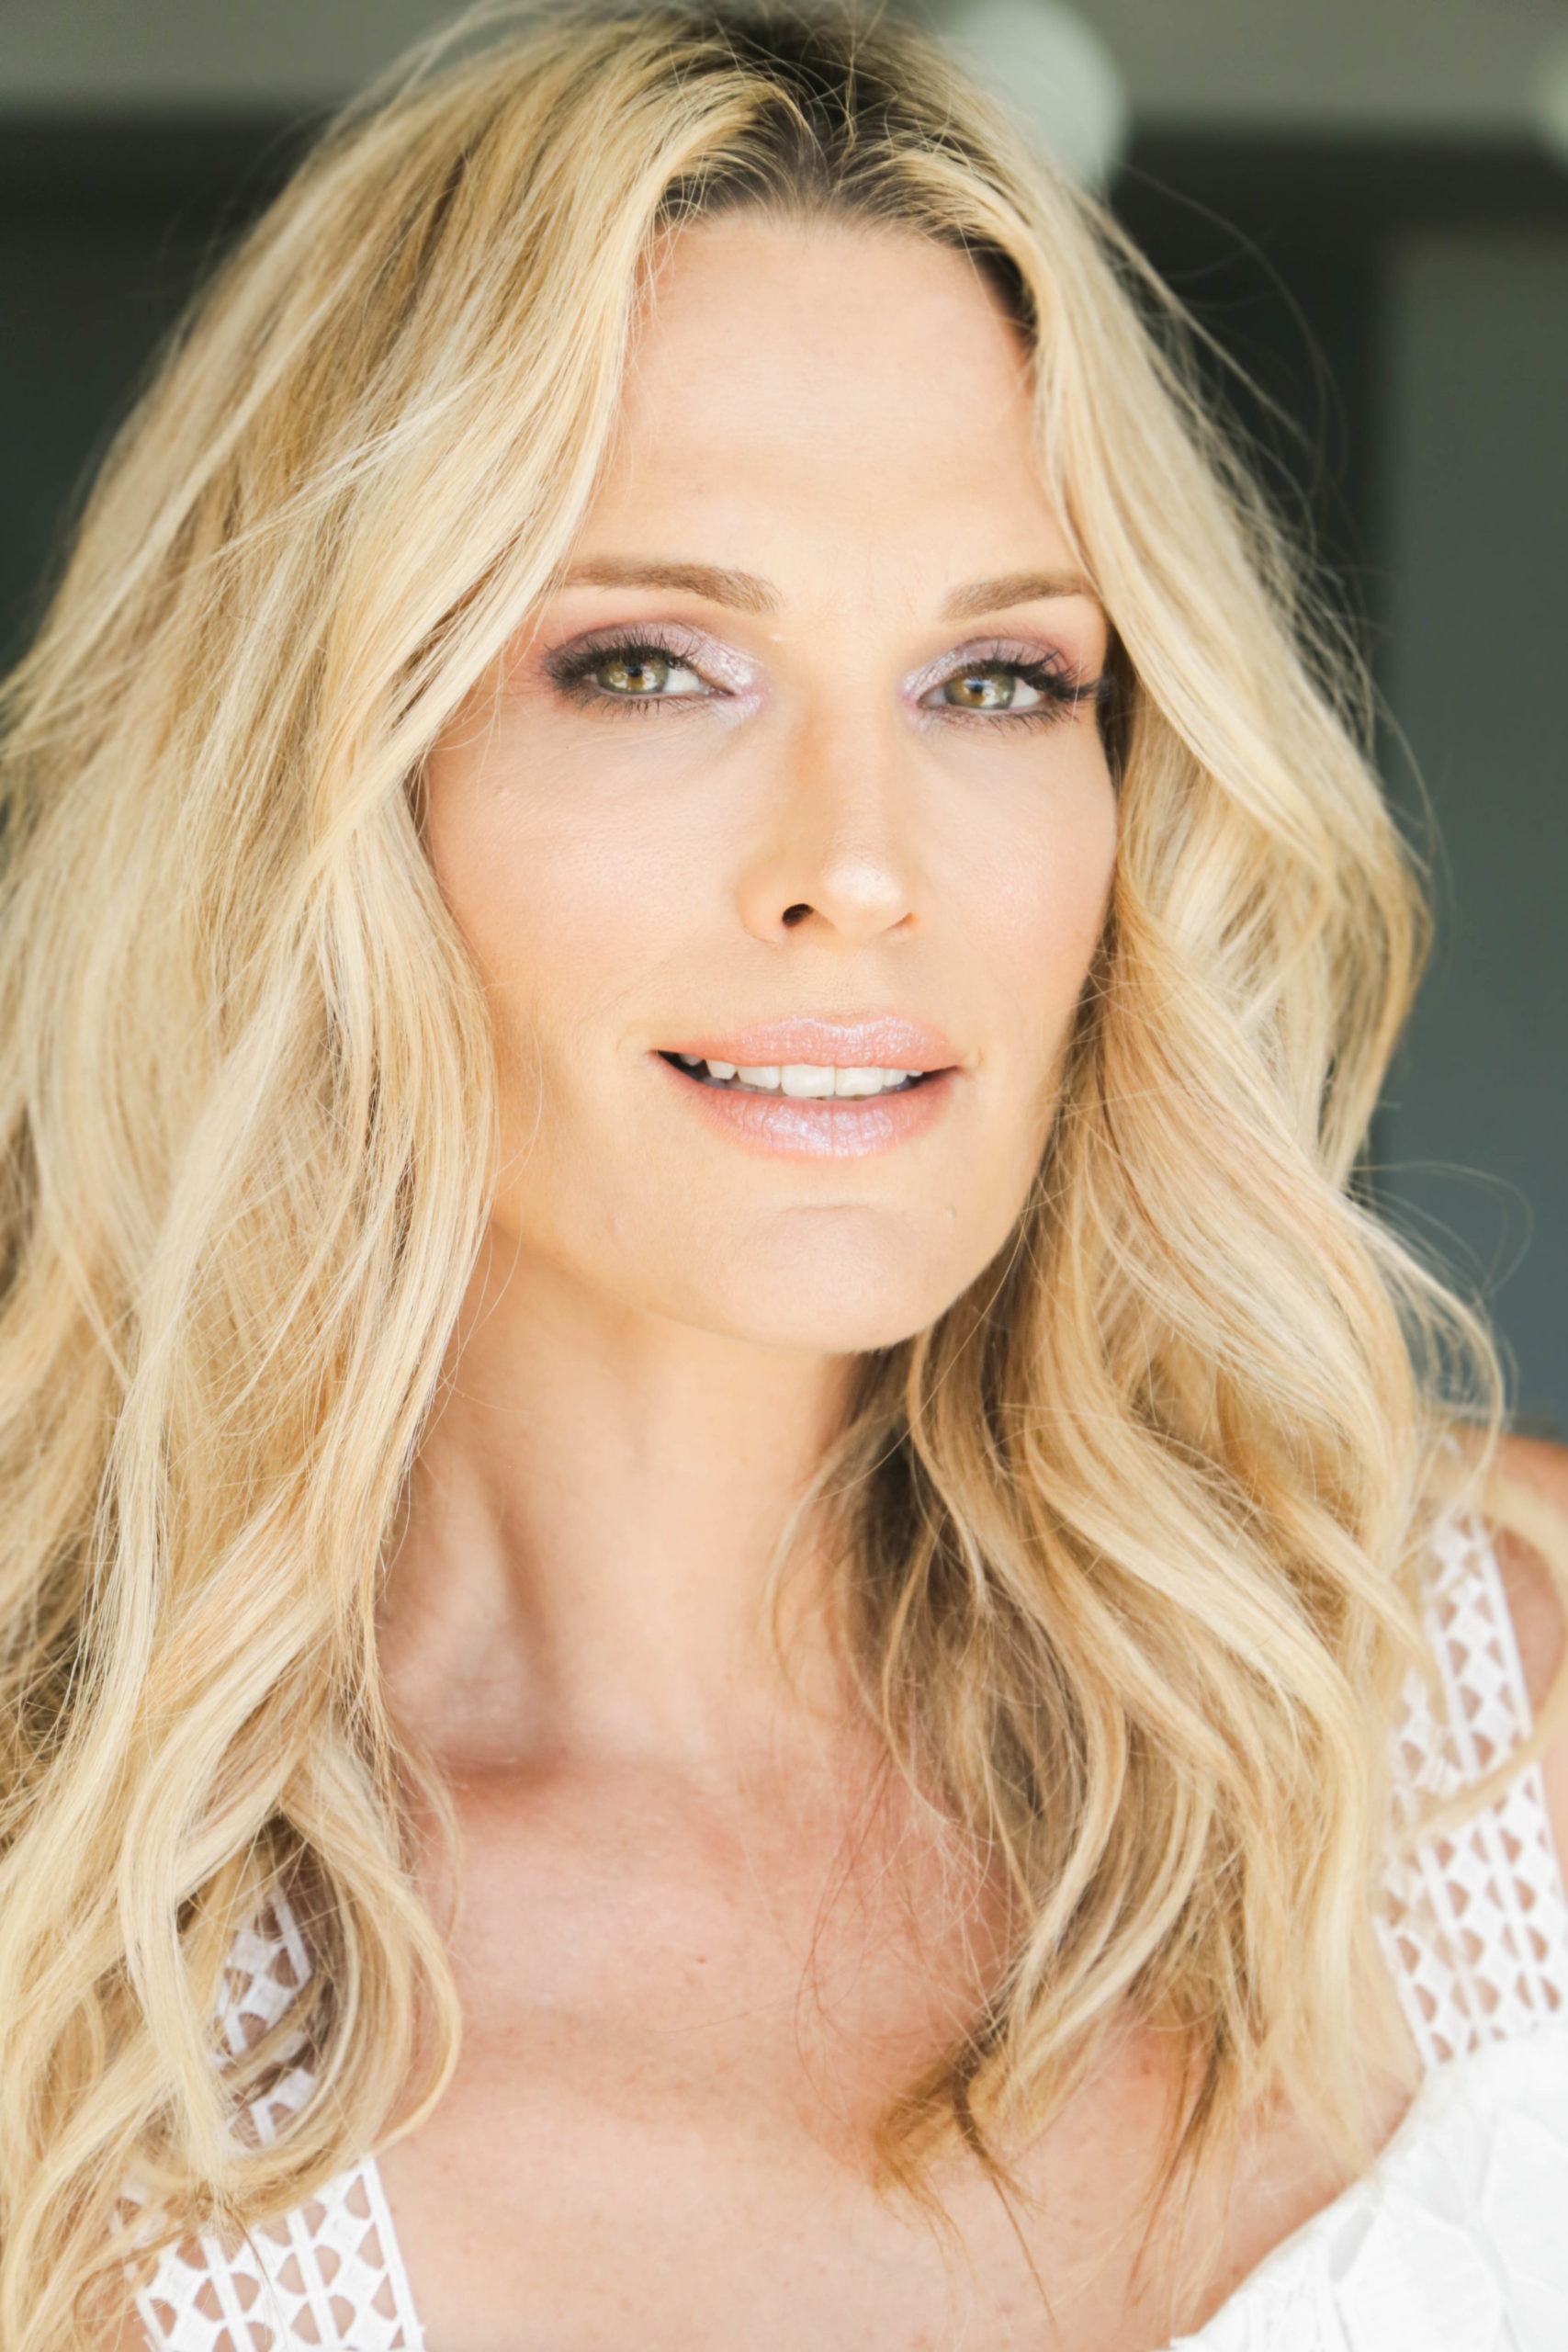 In Makeup - Page 2 of 3 - Molly Sims